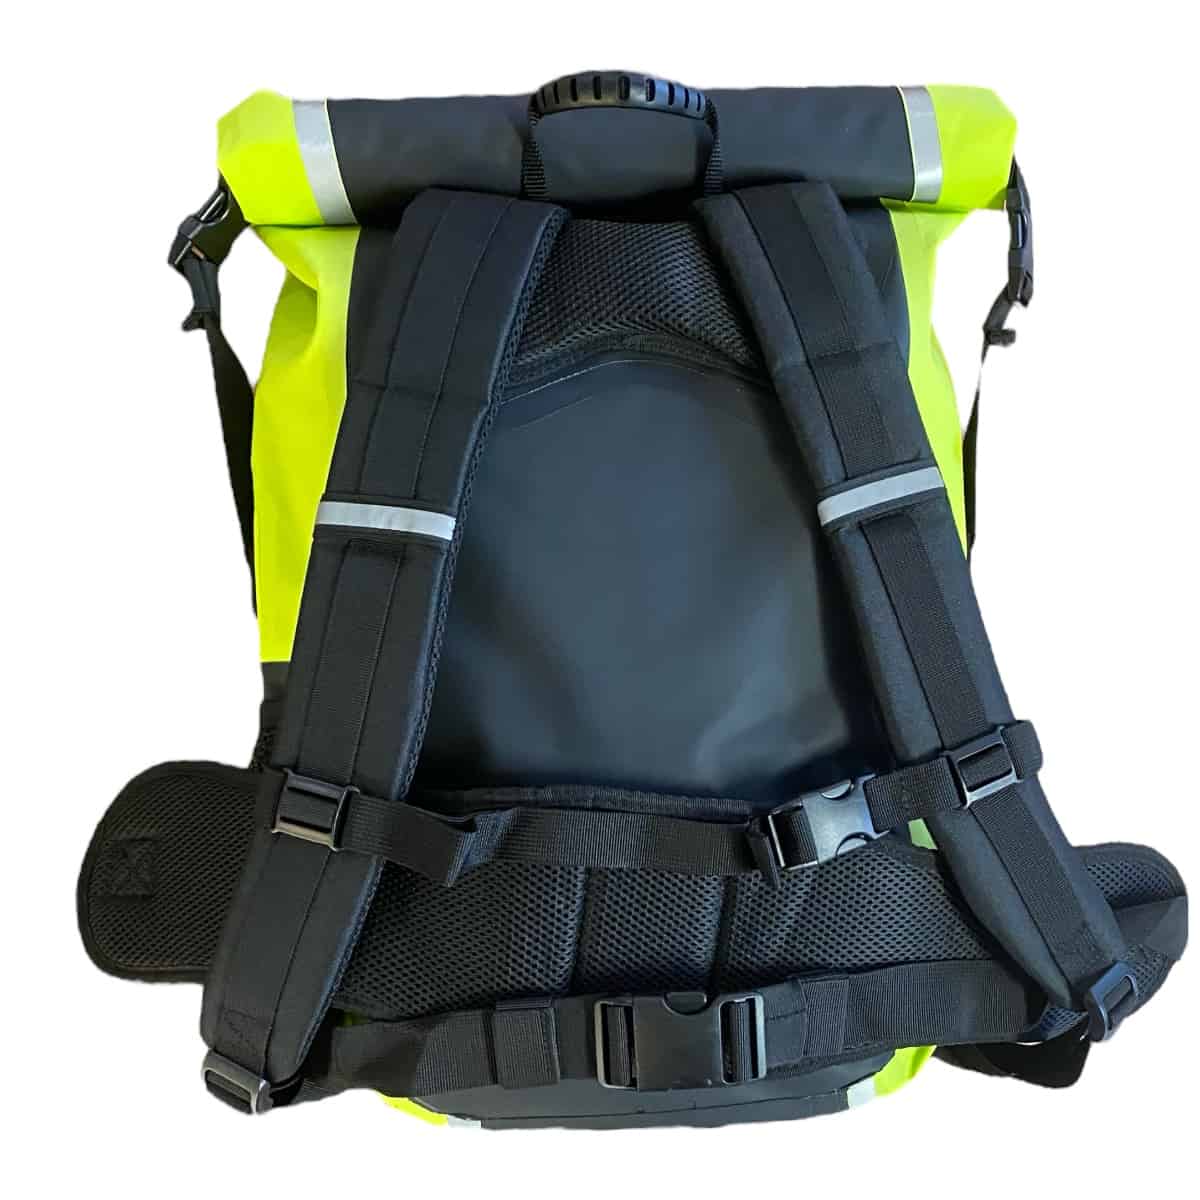 Get Ready For Any Adventure with Oxford's Aqua B-25 Hydro Backpack